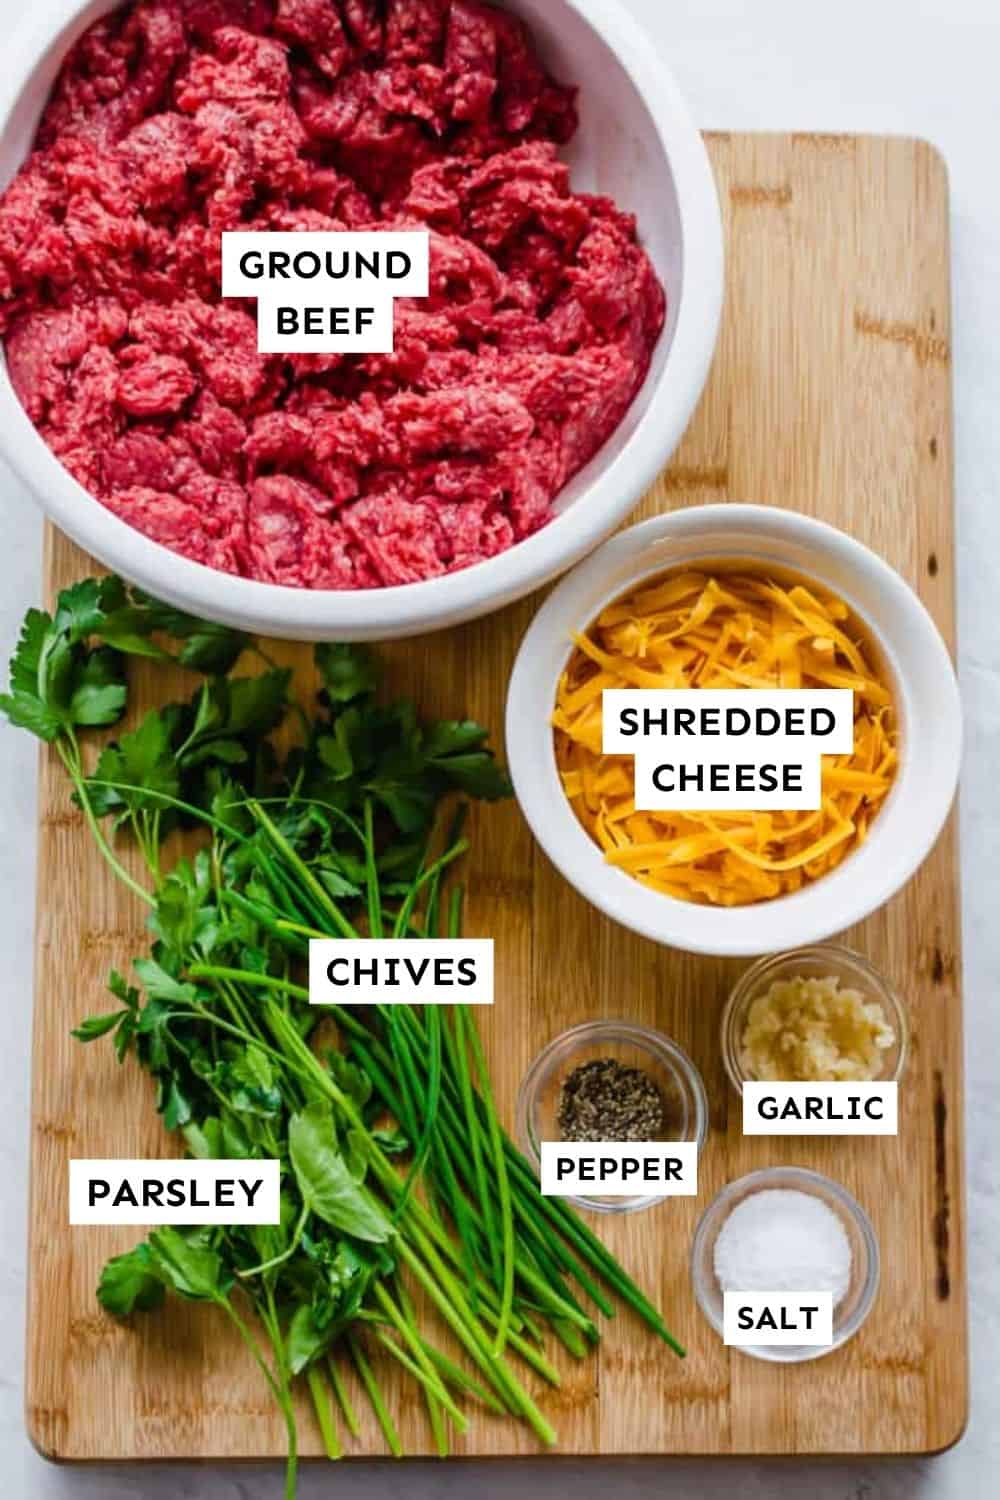 Cheesy chive burger ingredients measured out and labeled.